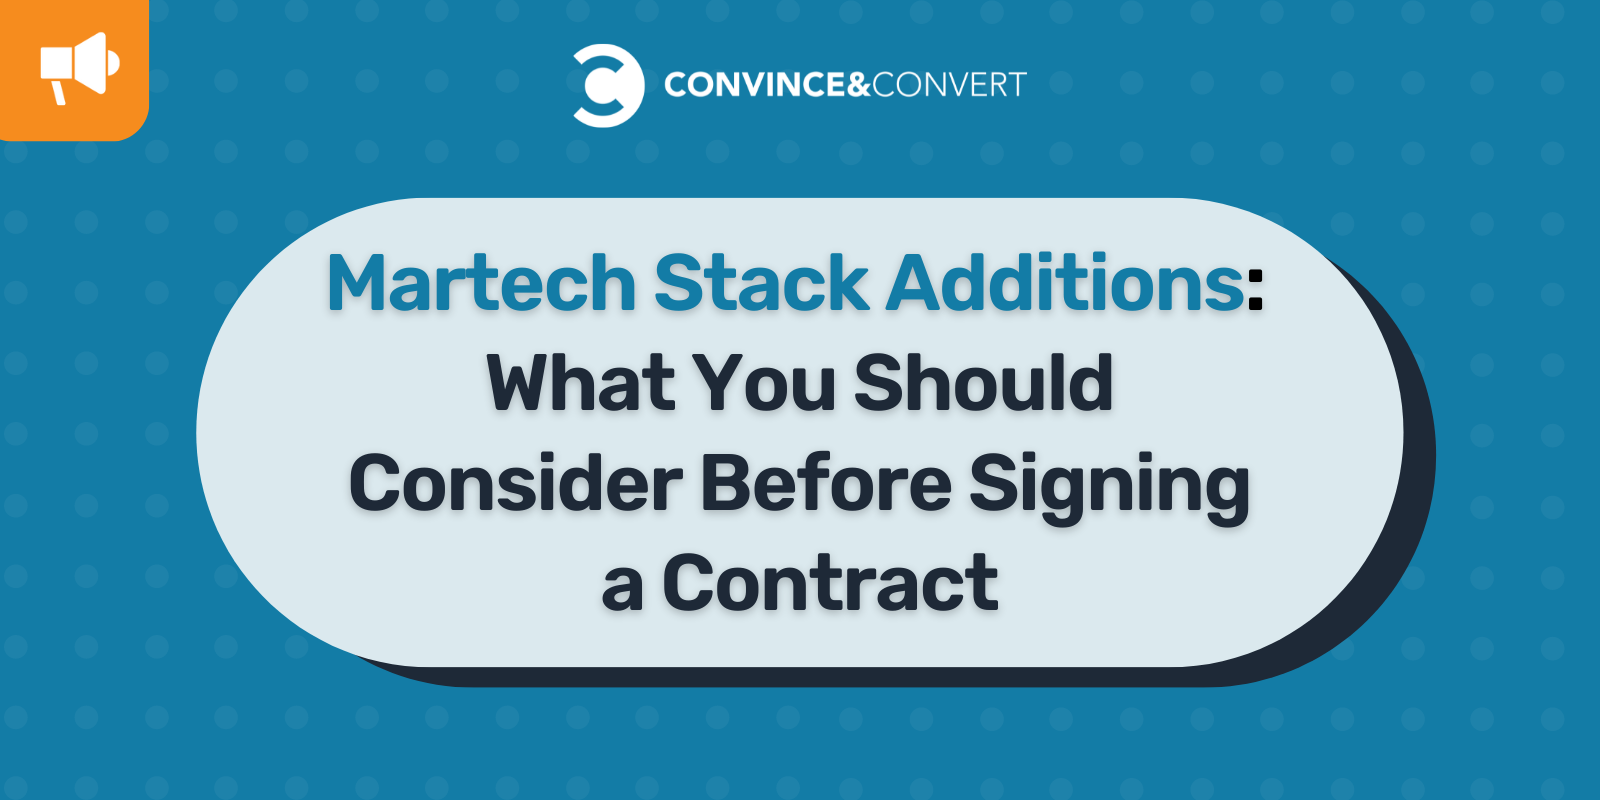 Martech Stack Additions: What You Should Consider Before Signing a Contract